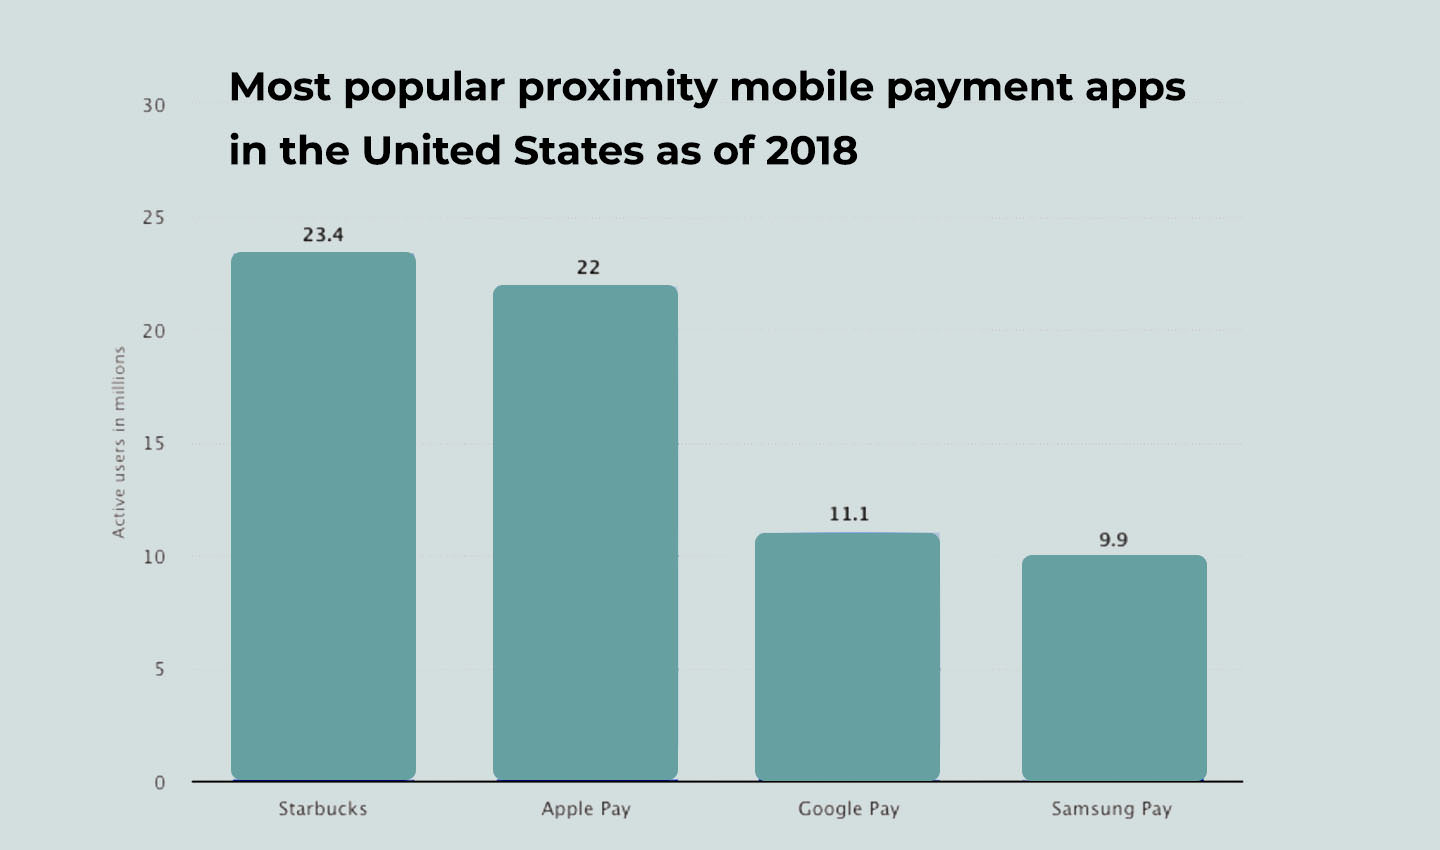 Most popular proximity mobile payment apps